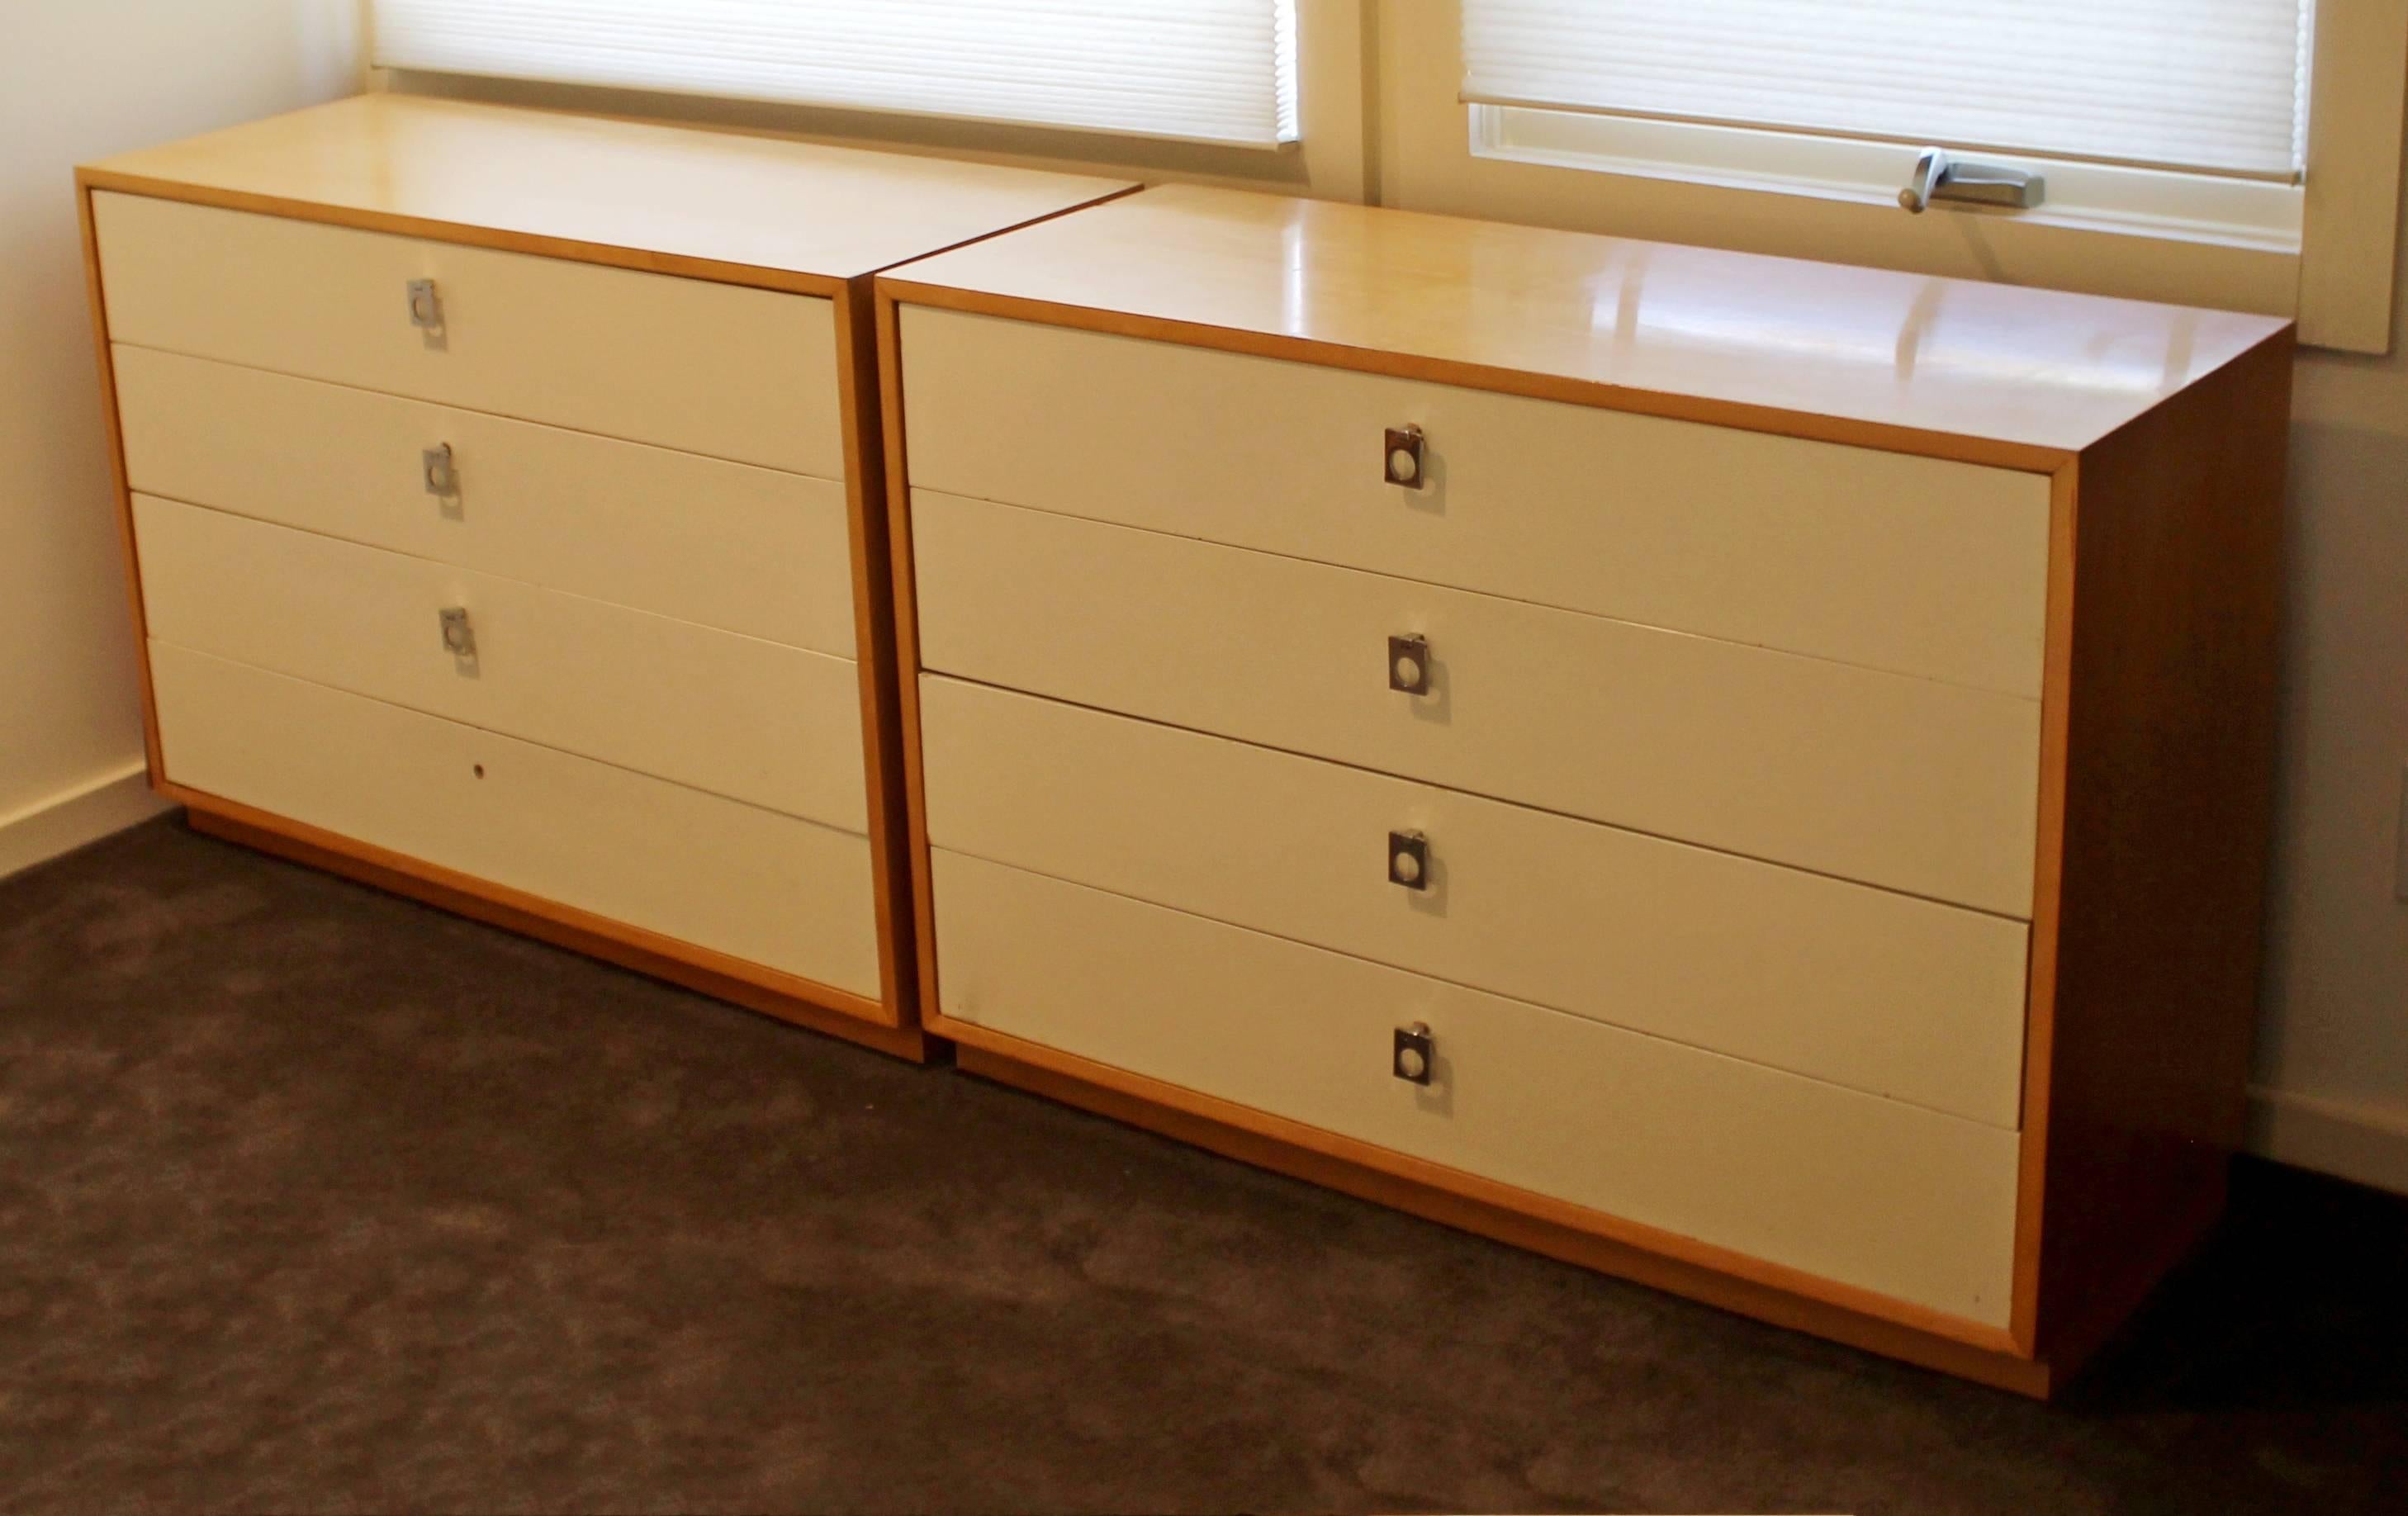 For your consideration is a fabulous pair of maple dressers, with four drawers each and original chrome pulls, by Jack Carwright for Founders, circa 1960s. In very good condition, but is missing one of the pulls. The dimensions of each are 40